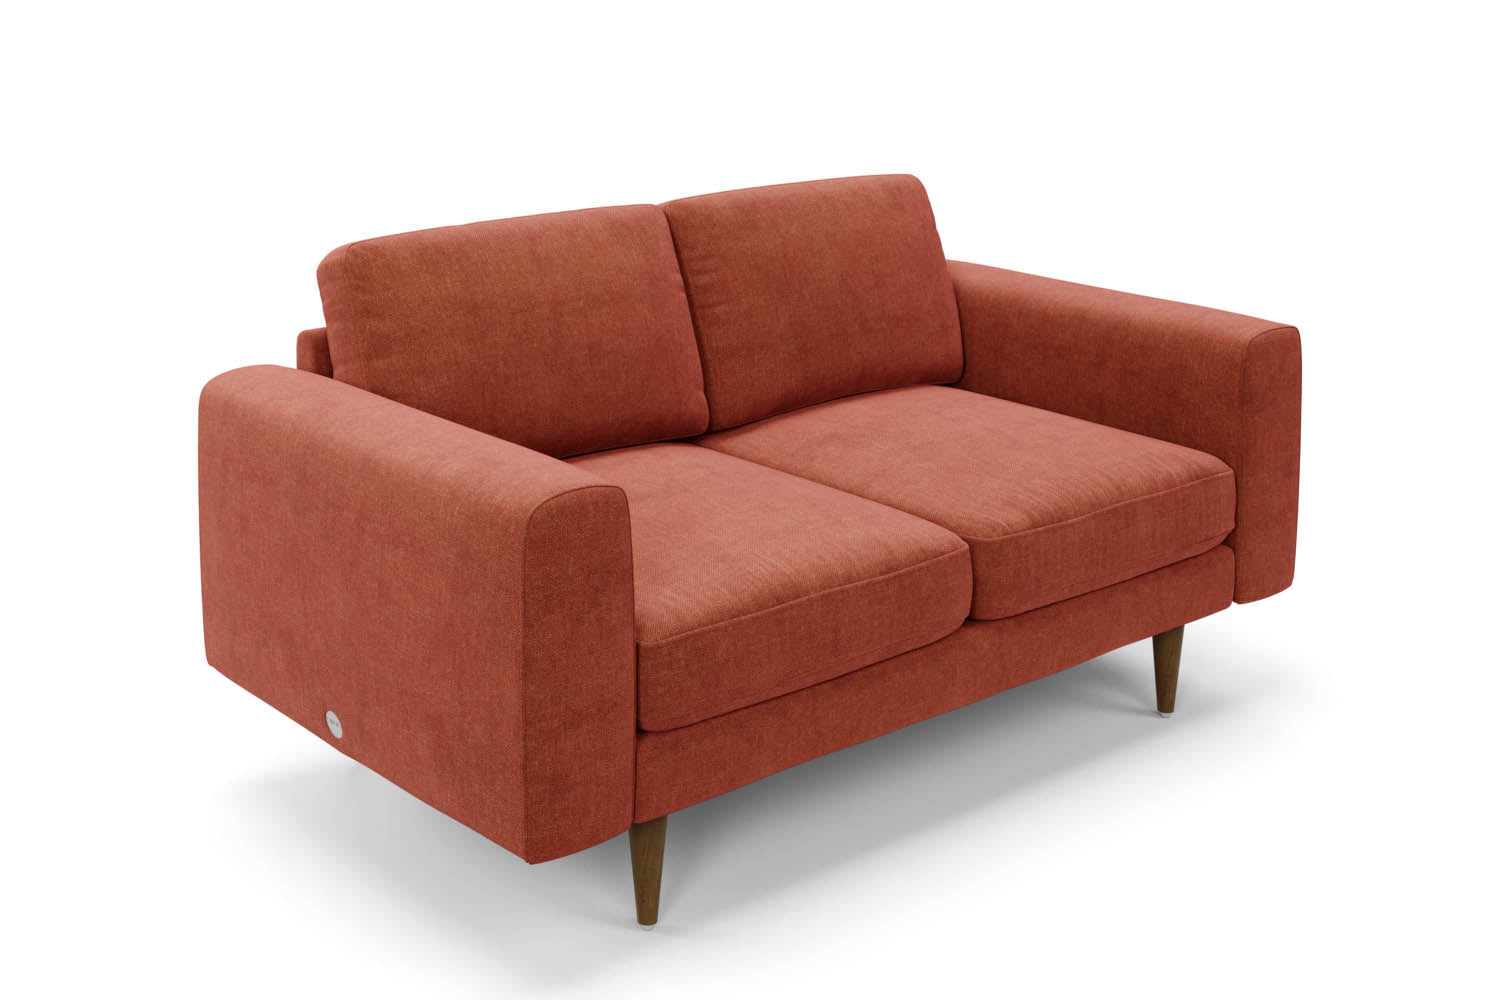 The Big Chill 2 Seater Sofa in Spice Chenille with brown legs